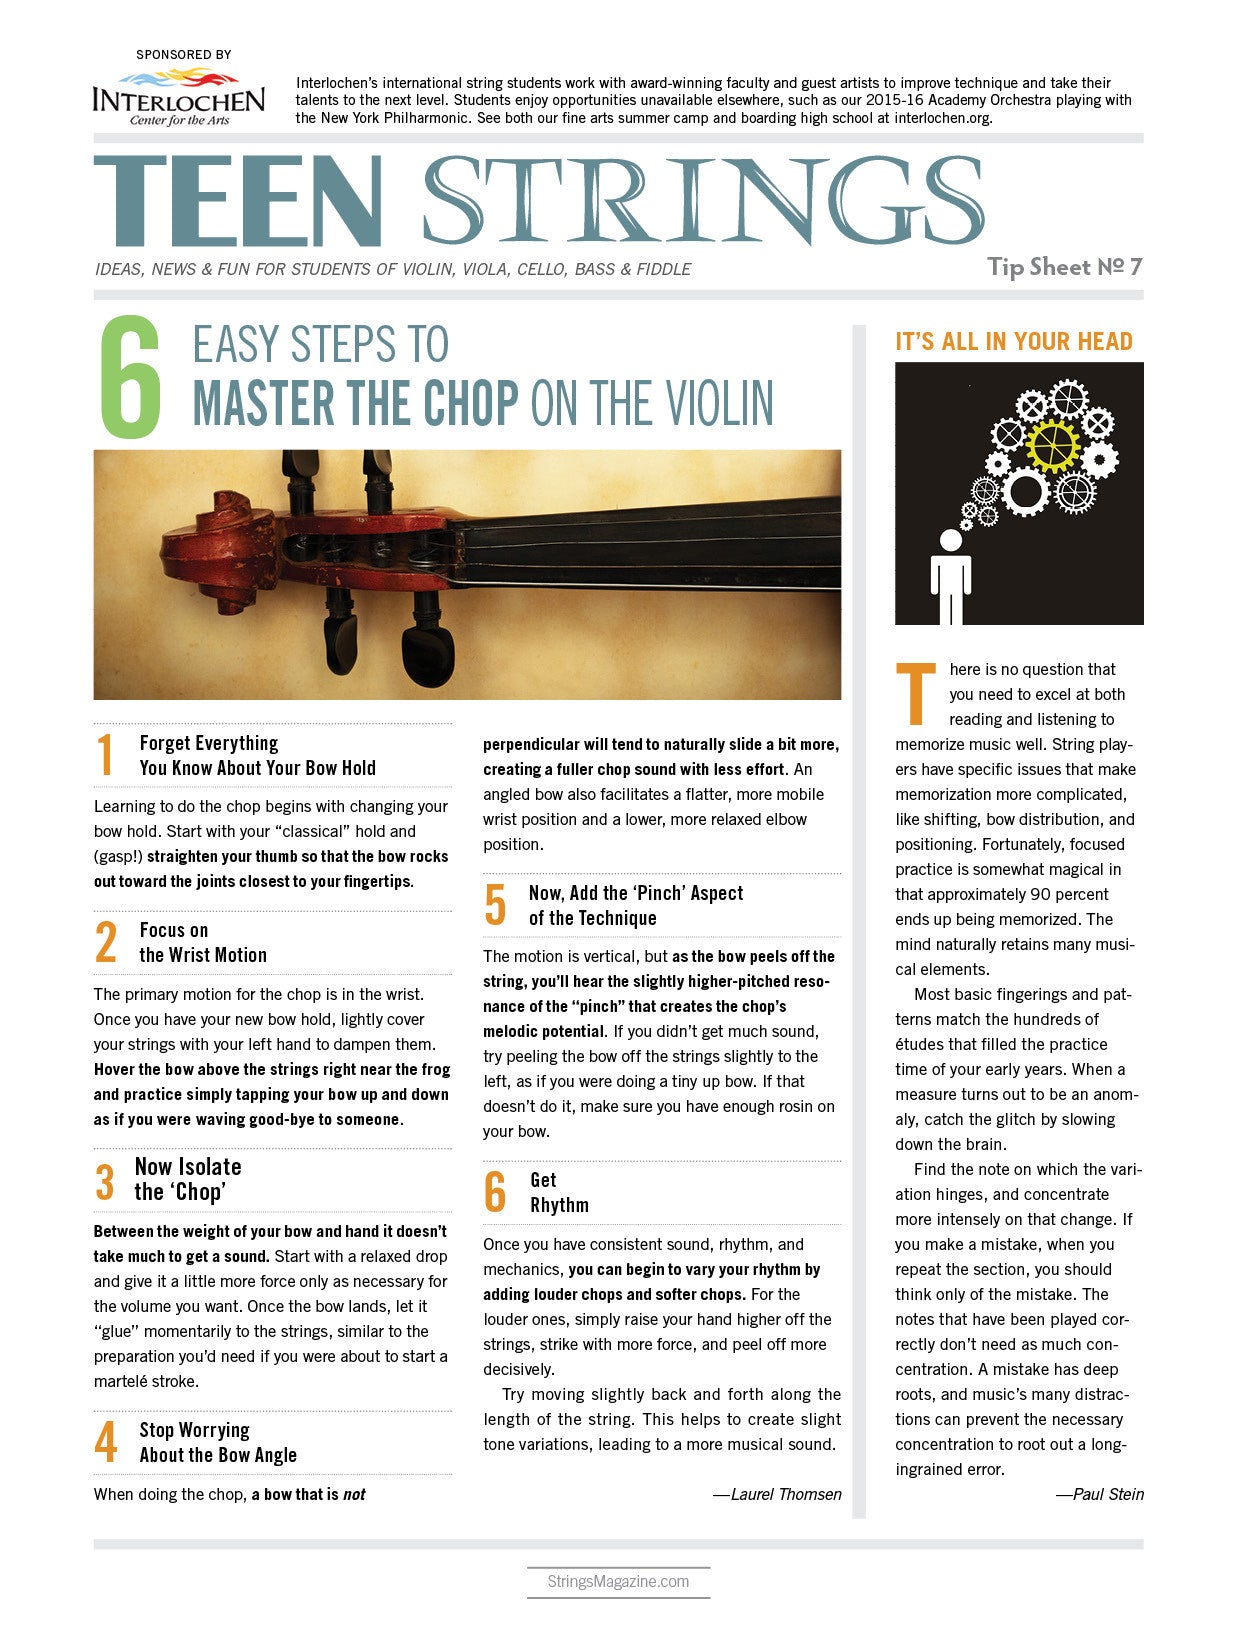 Teen Strings Tip Sheet #7: Master the Chop on the Violin